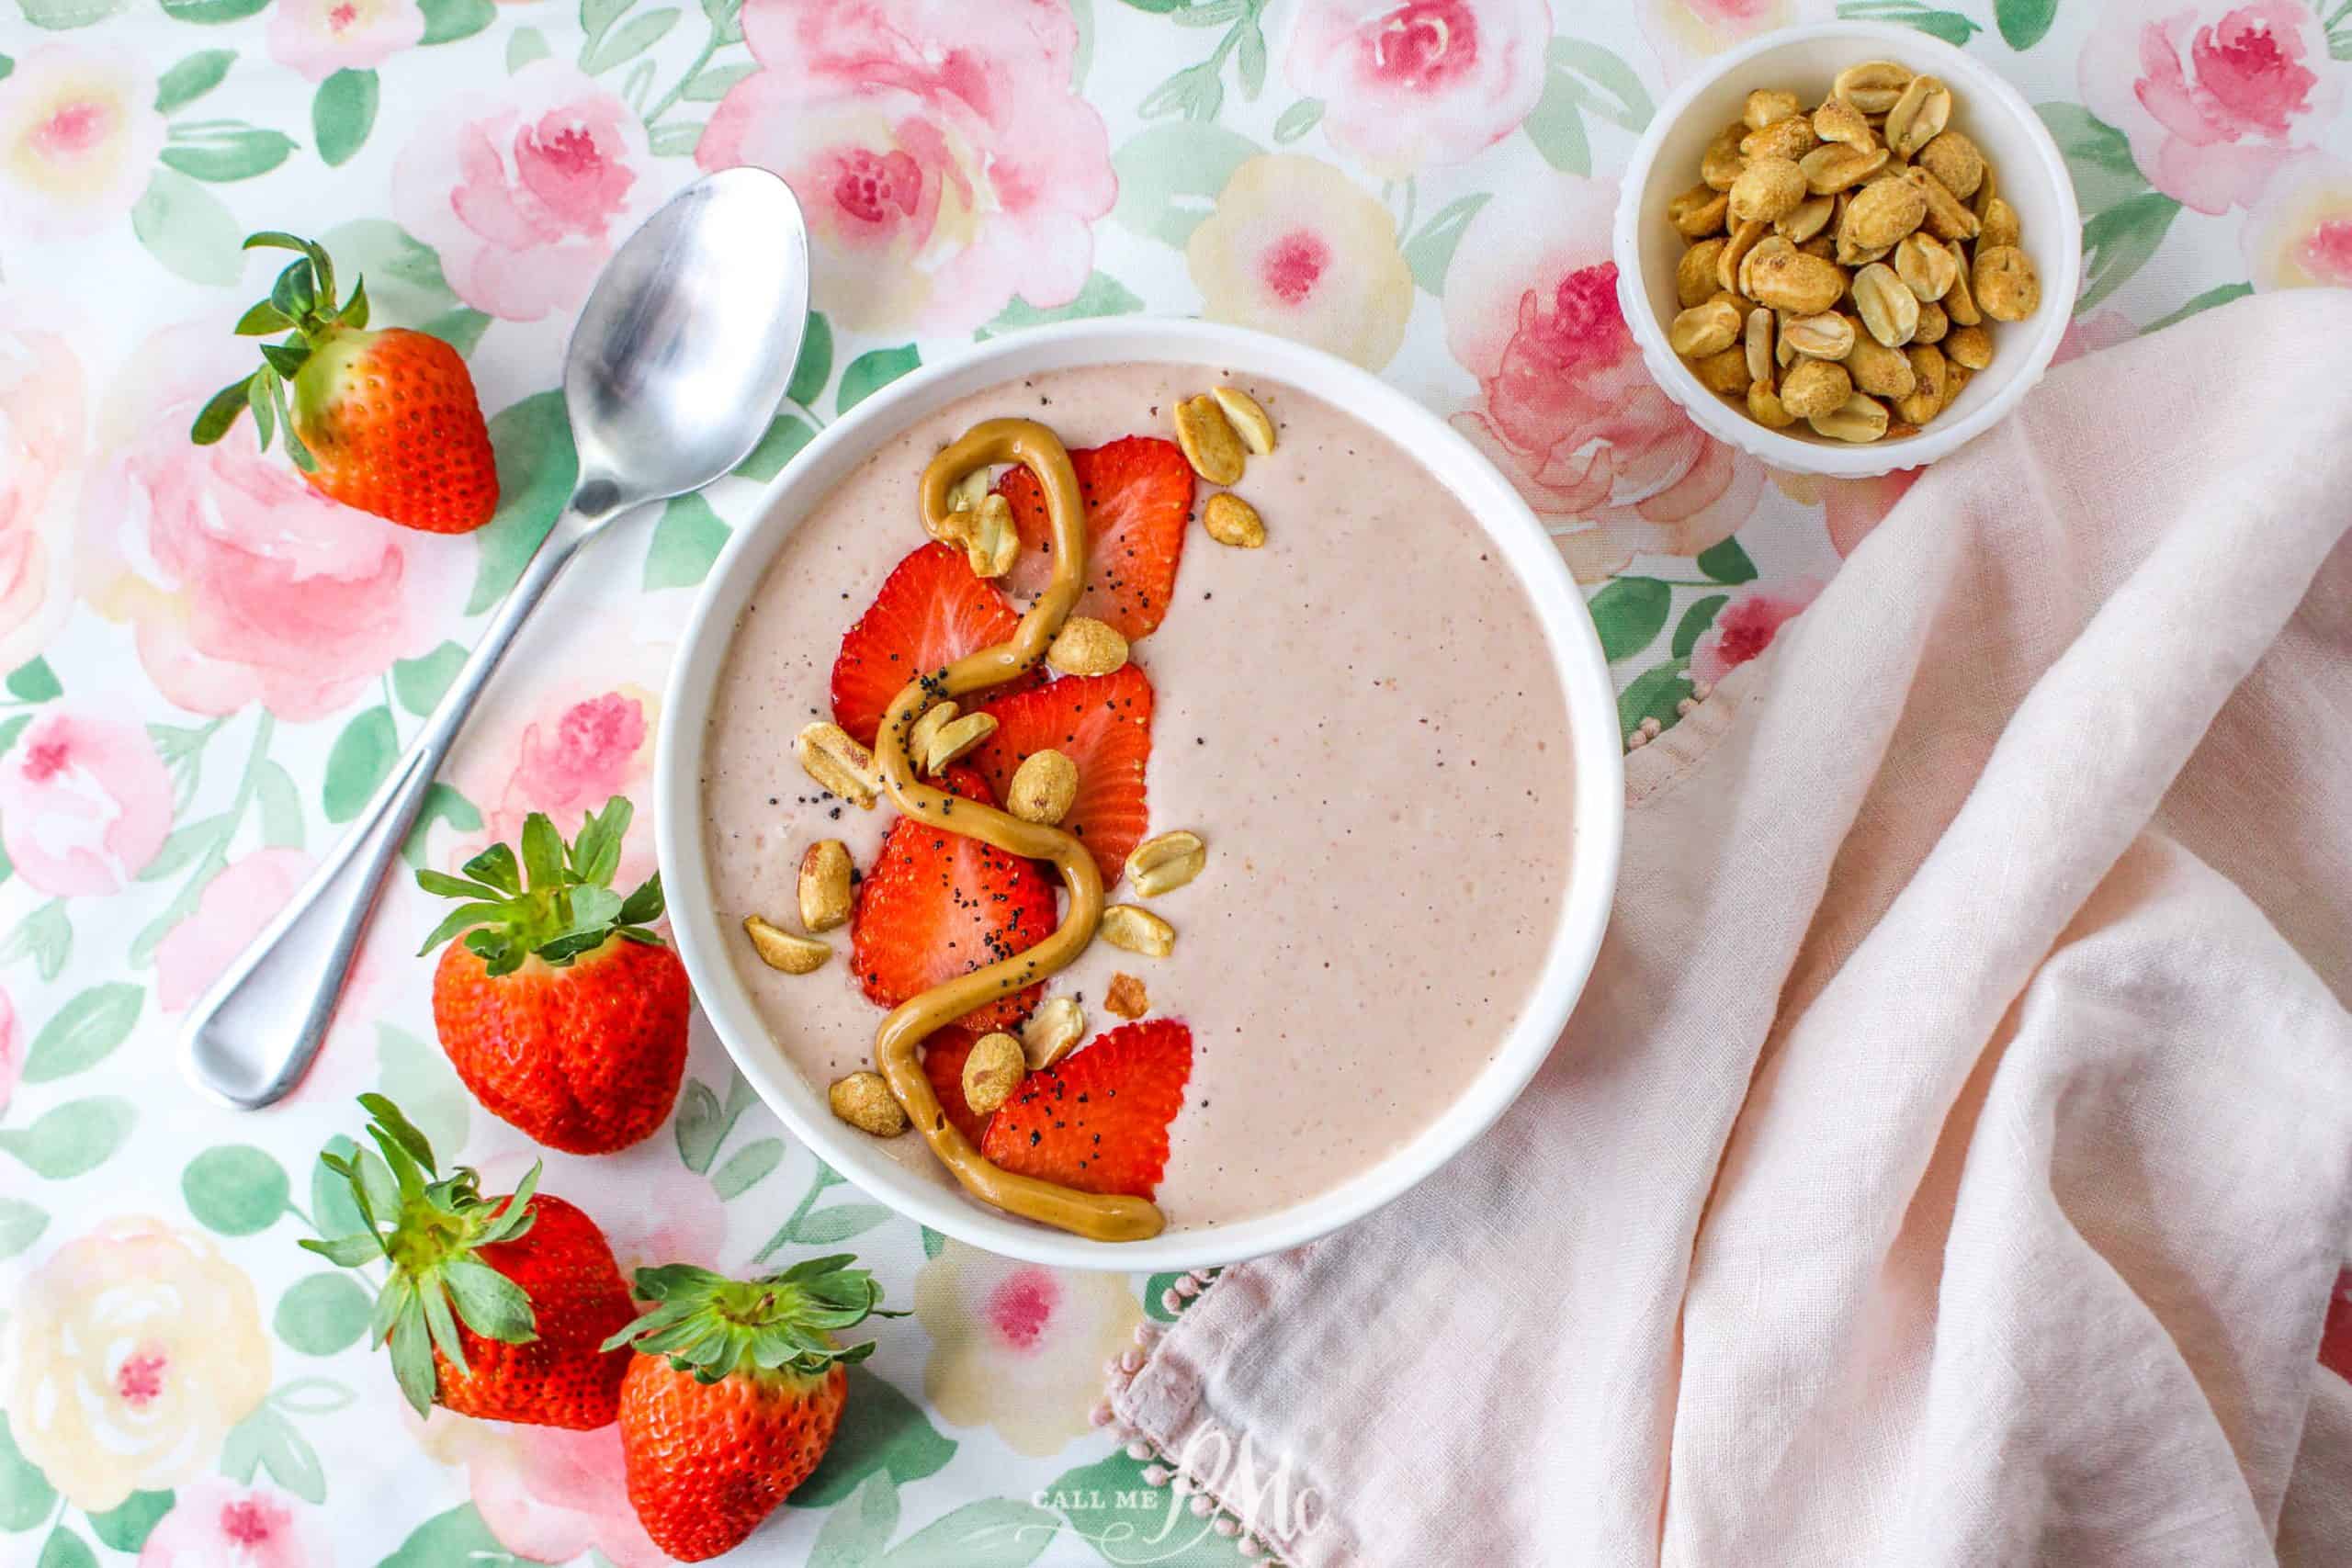 Smoothie  topped with strawberries, peanuts, and peanut butter swirl in bowl.